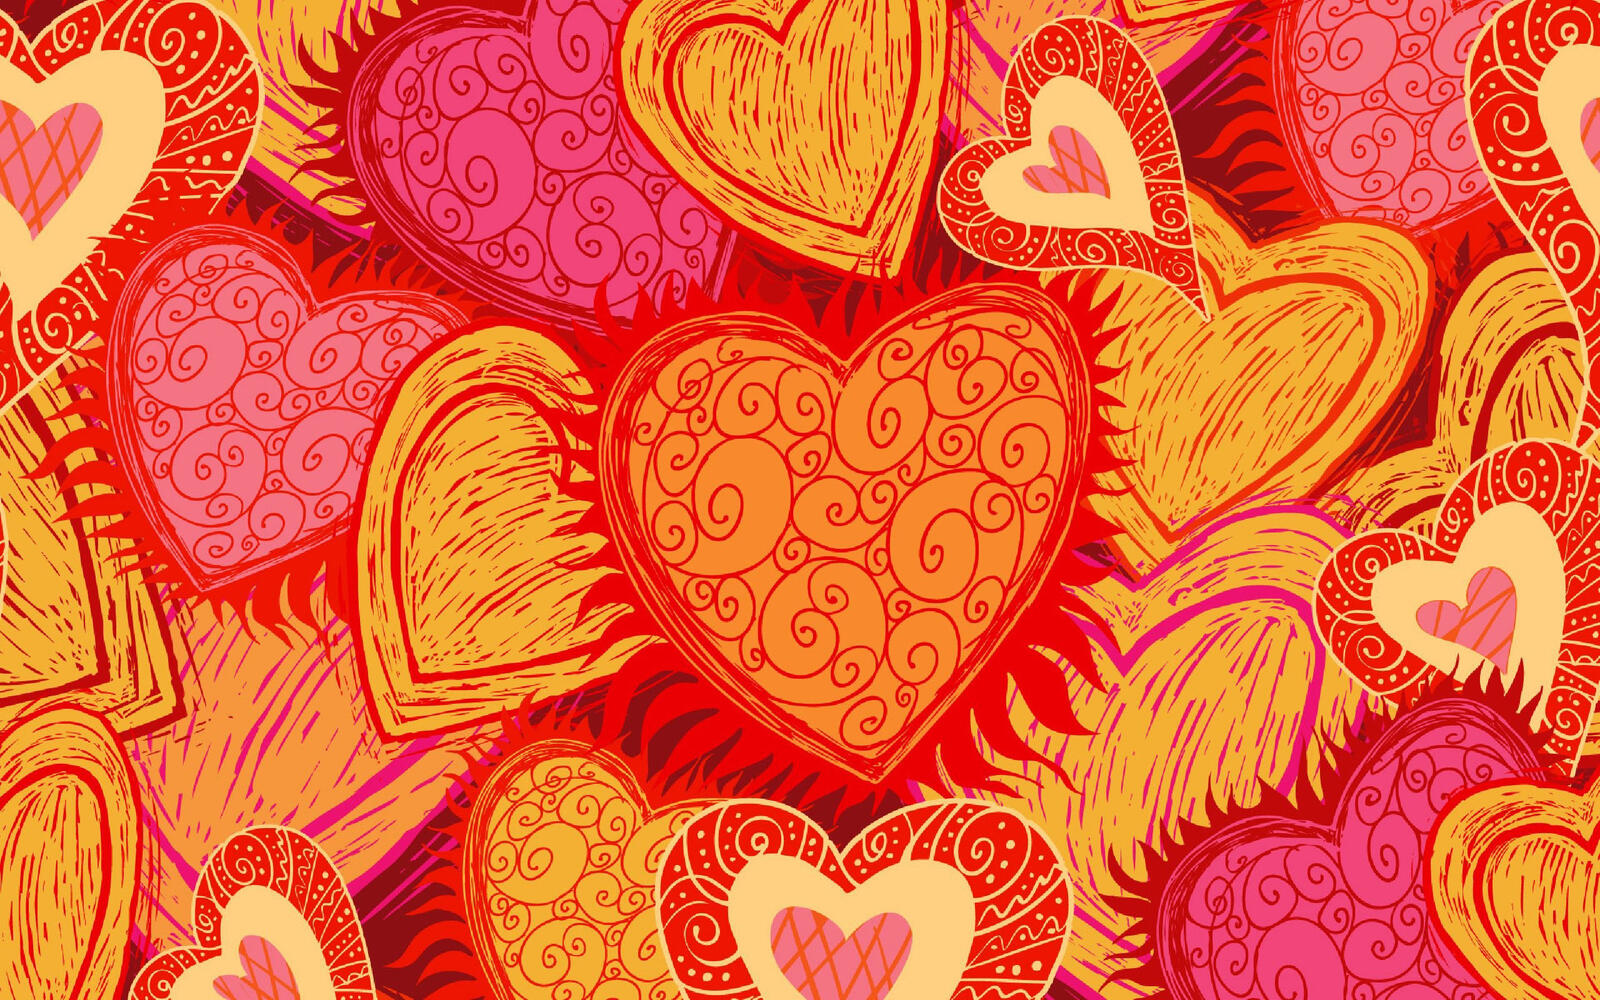 Wallpapers background screensaver hearts on the desktop